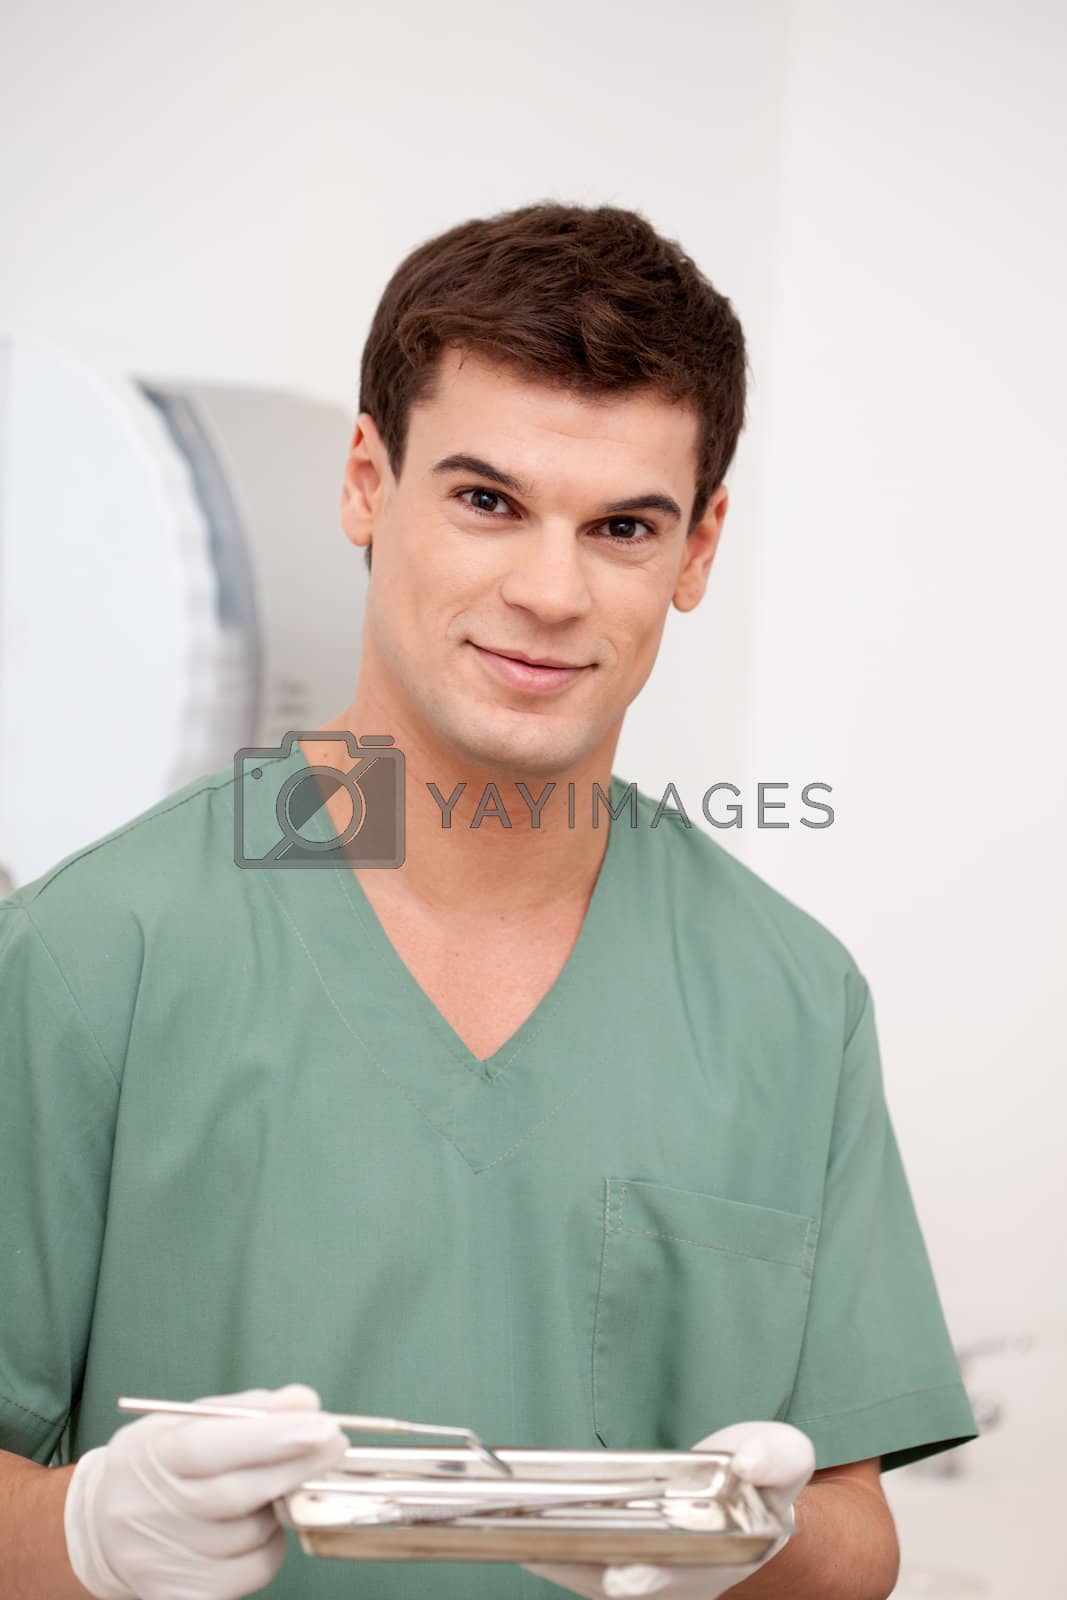 Royalty free image of Dentist Man Portrait with a Smile by leaf